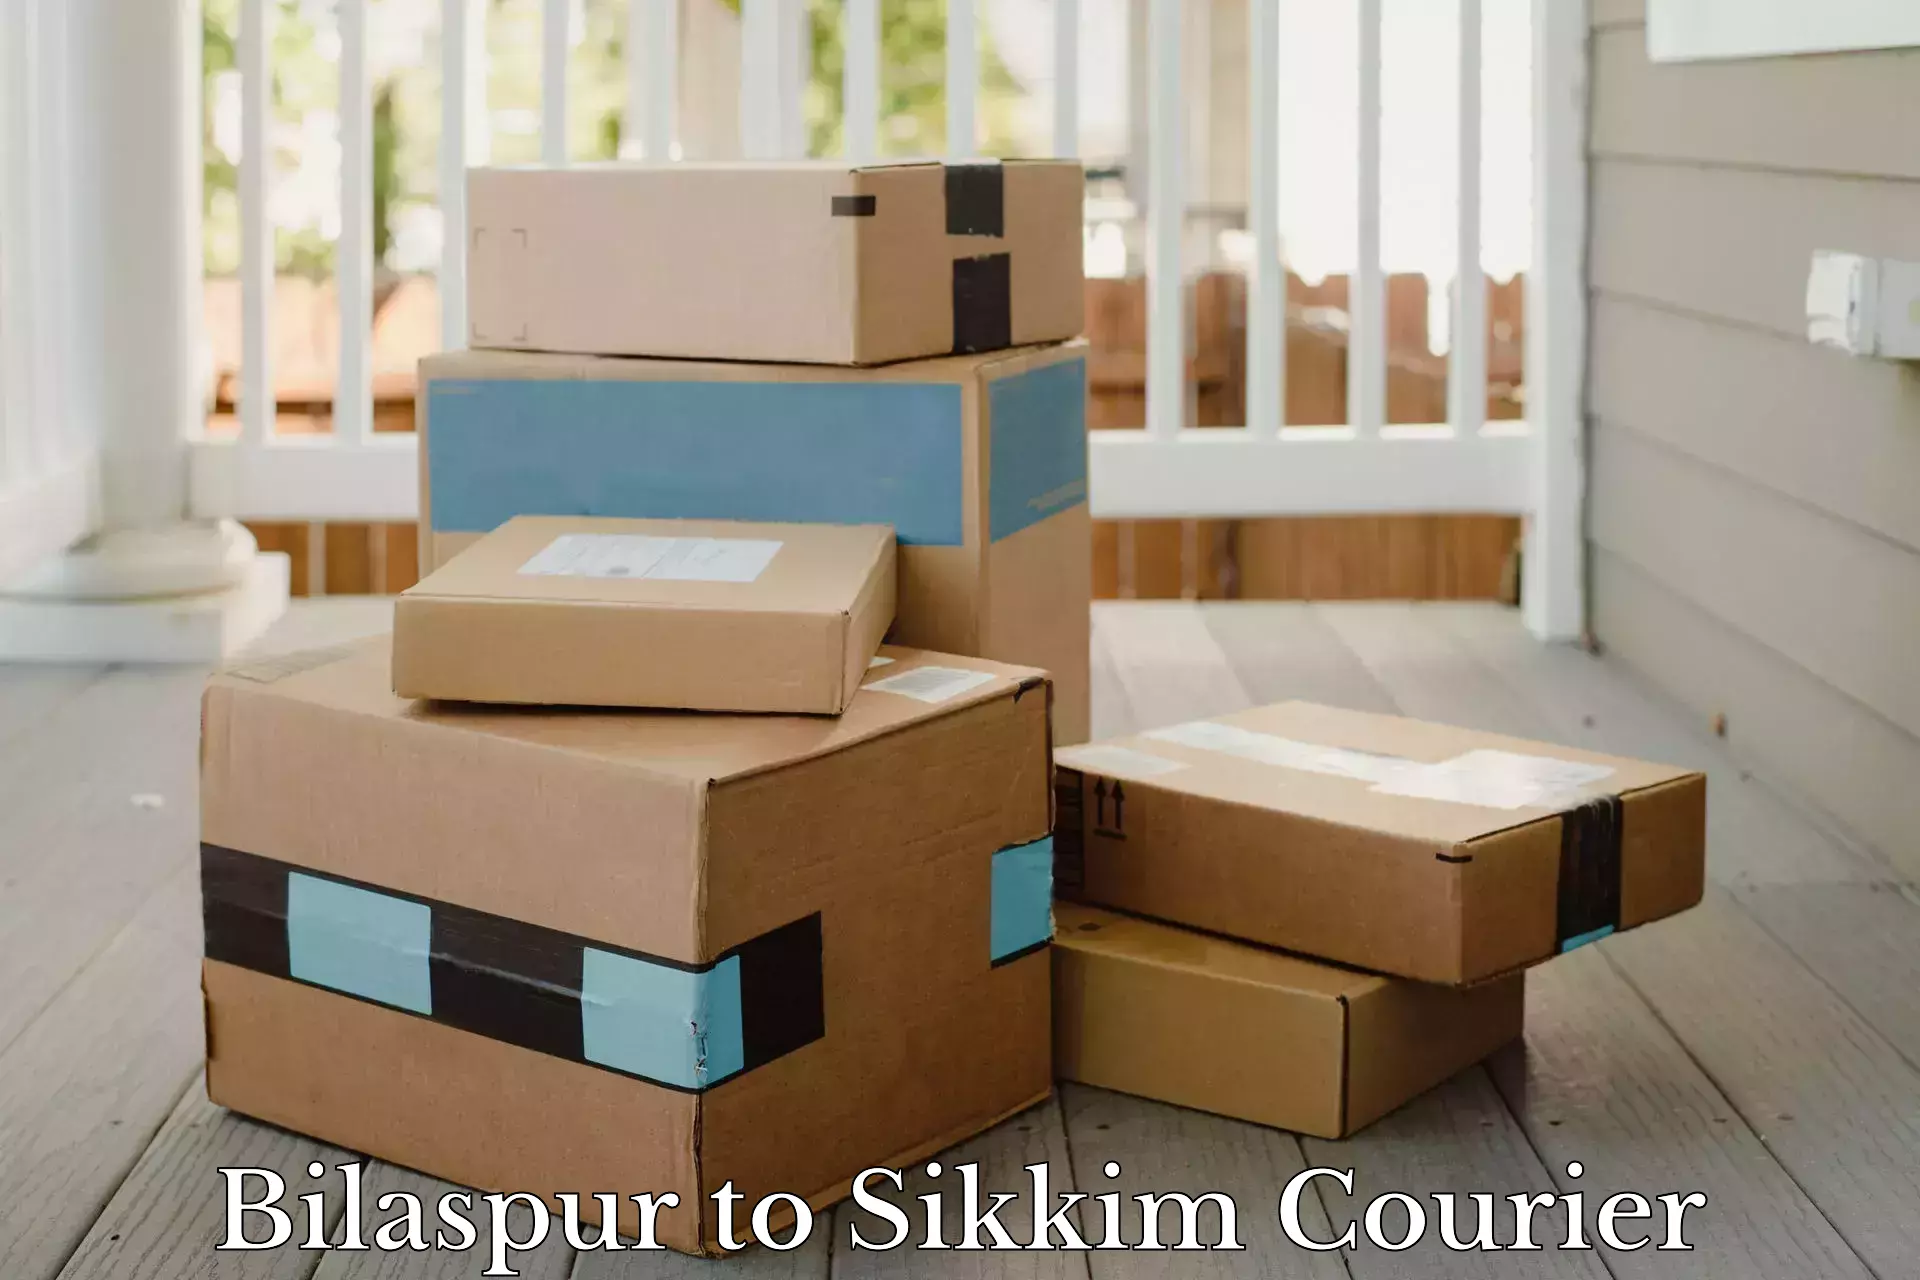 Customer-focused courier Bilaspur to Geyzing